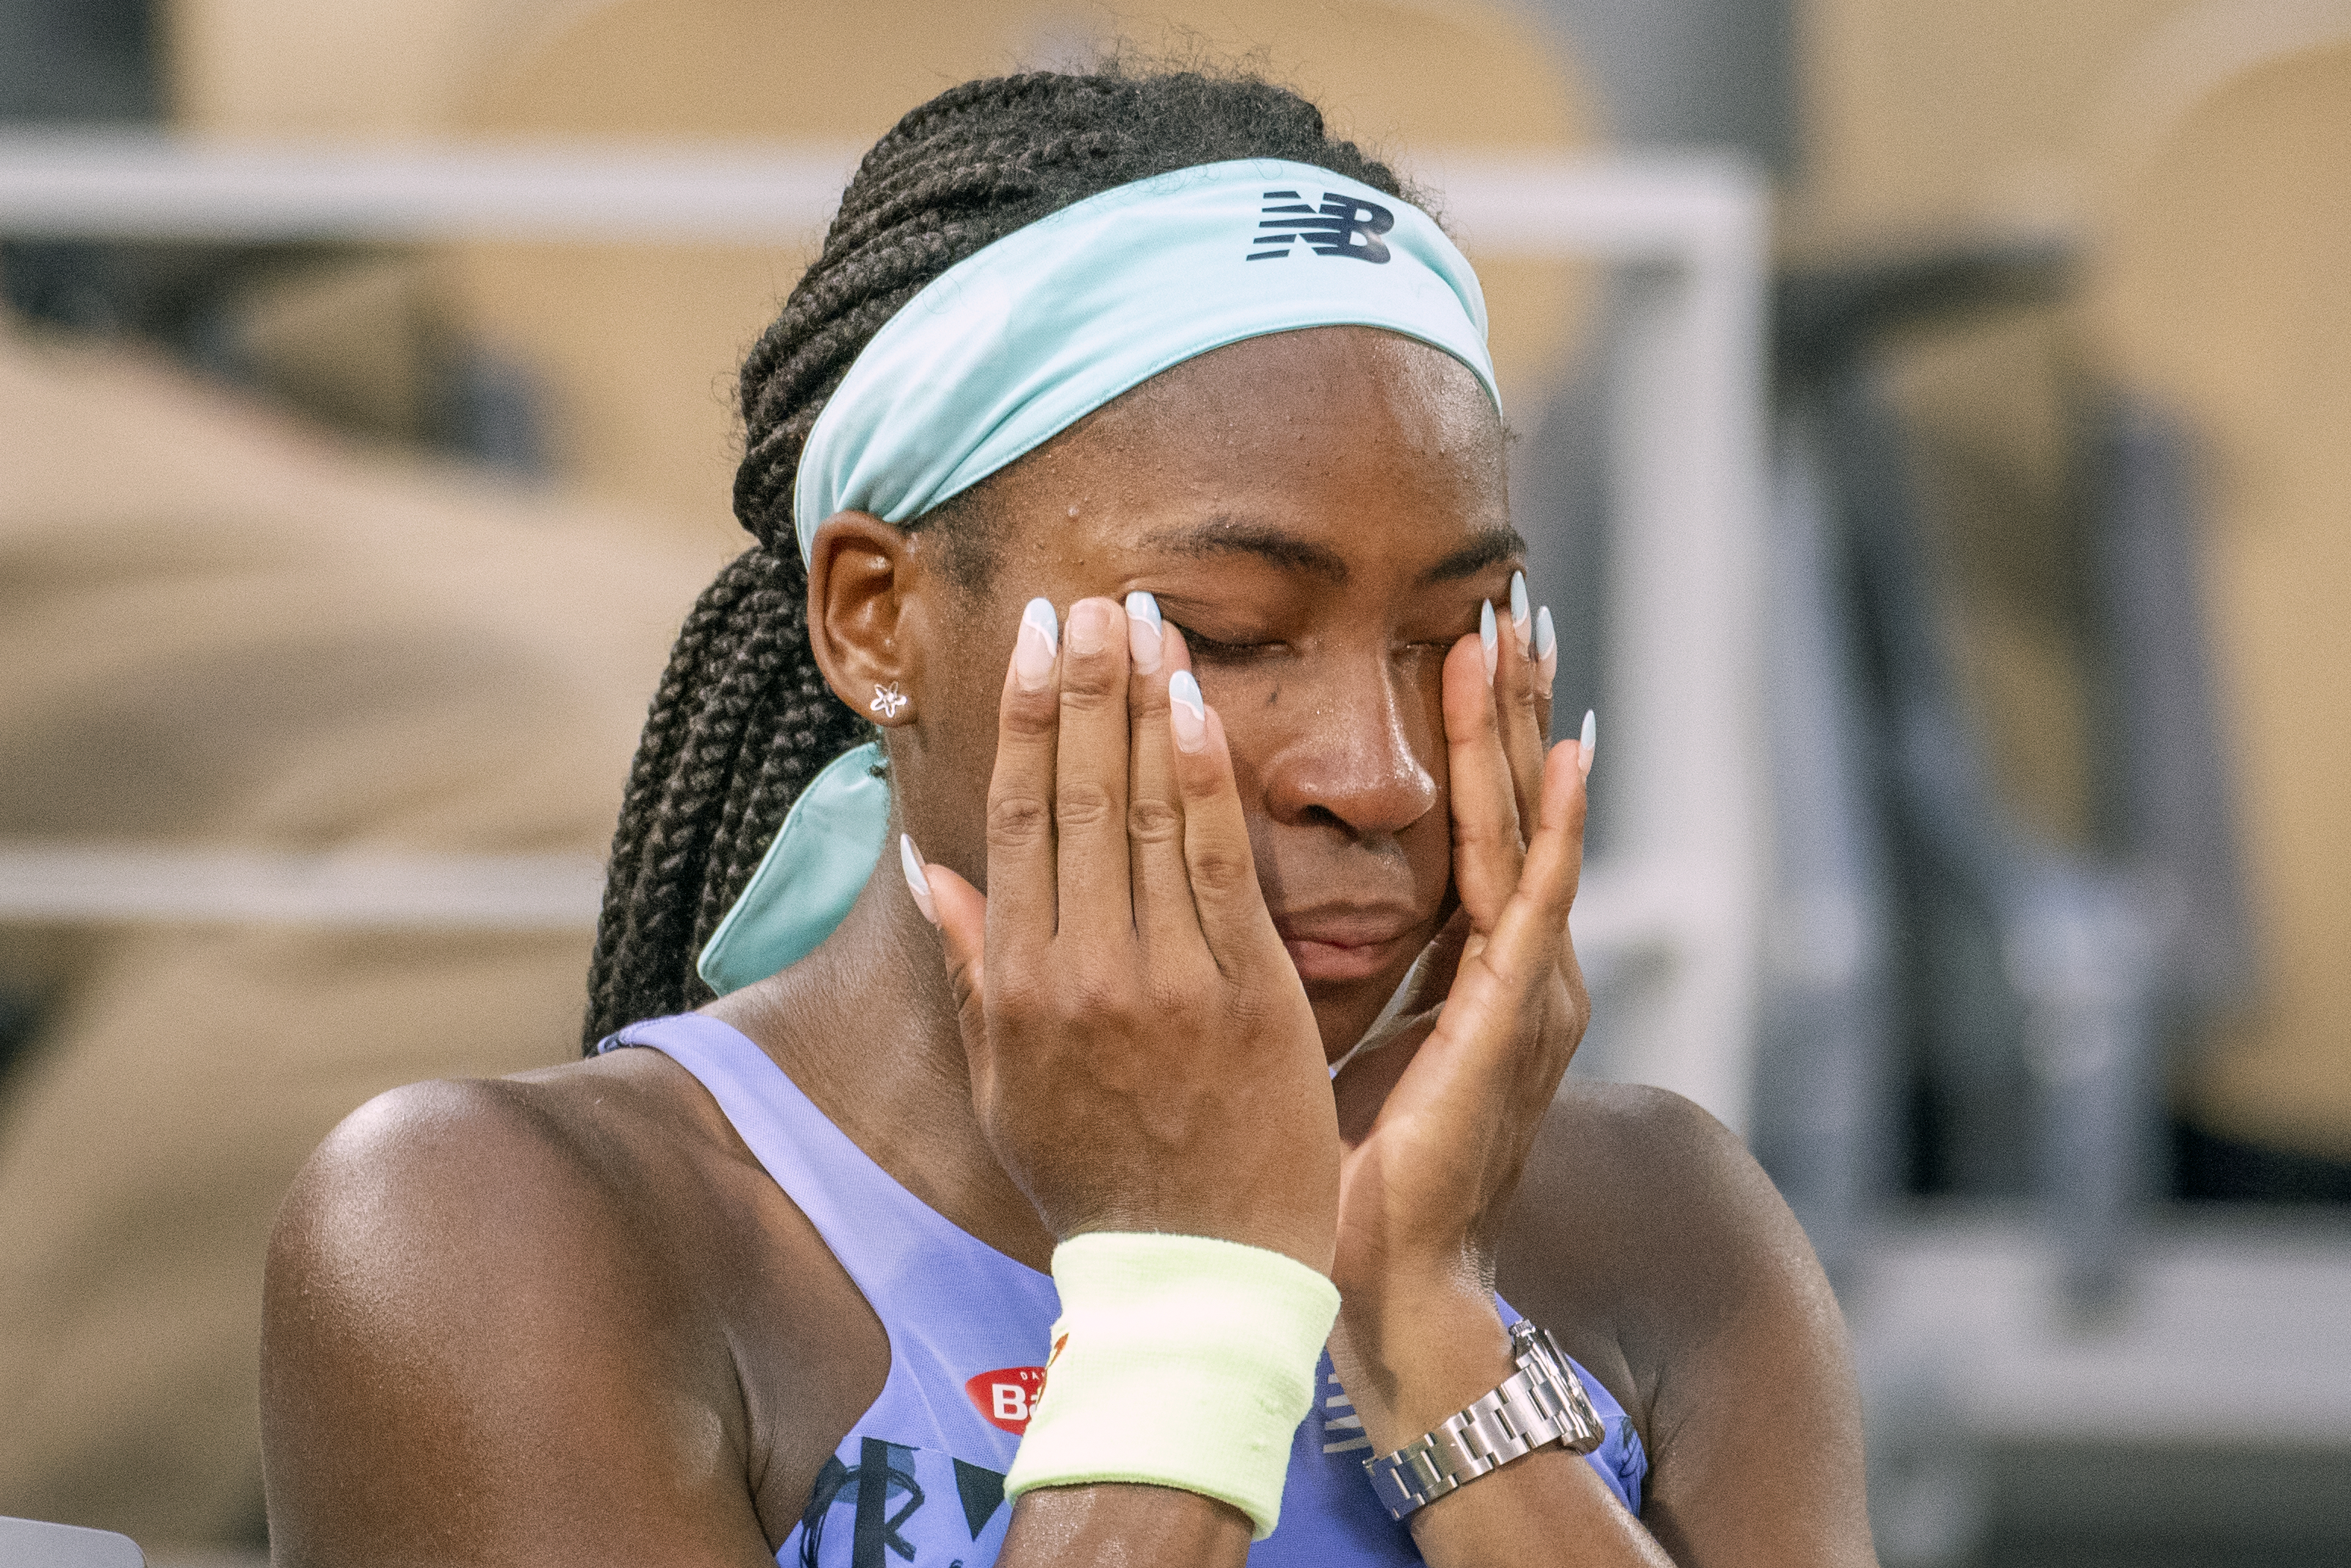 Coco Gauff after her loss to Iga Swiatek during the Singles Final for Women on Court Philippe Chatrier, at the 2022 French Open Tennis Tournament, at Roland Garros, on June 4, 2022, in Paris, France. | Source: Getty Images